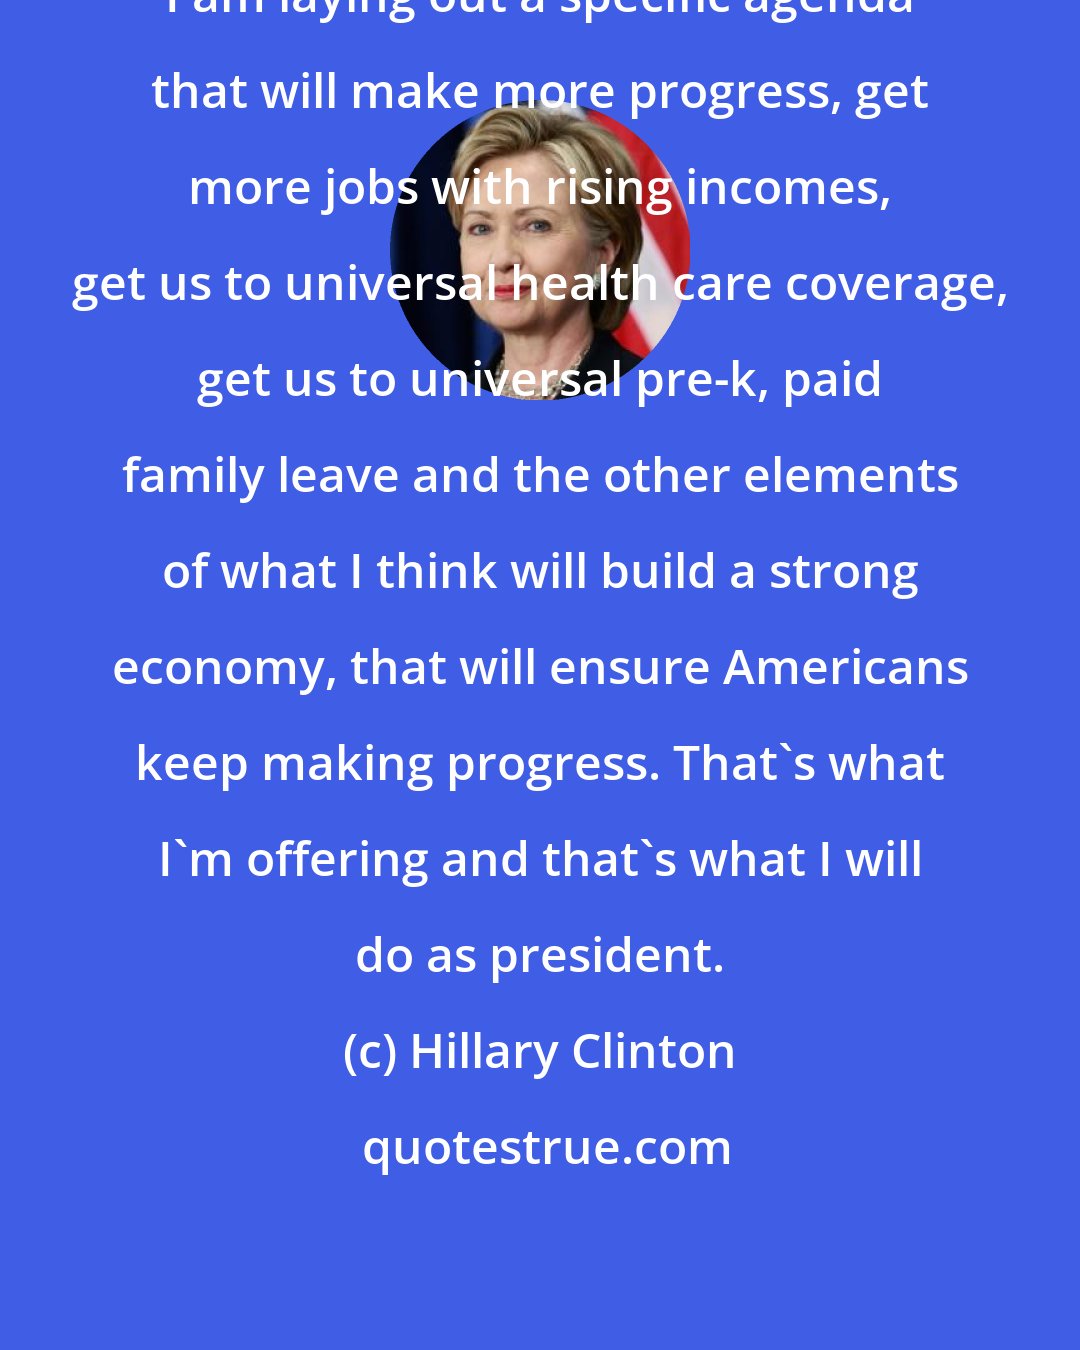 Hillary Clinton: I am laying out a specific agenda that will make more progress, get more jobs with rising incomes, get us to universal health care coverage, get us to universal pre-k, paid family leave and the other elements of what I think will build a strong economy, that will ensure Americans keep making progress. That's what I'm offering and that's what I will do as president.